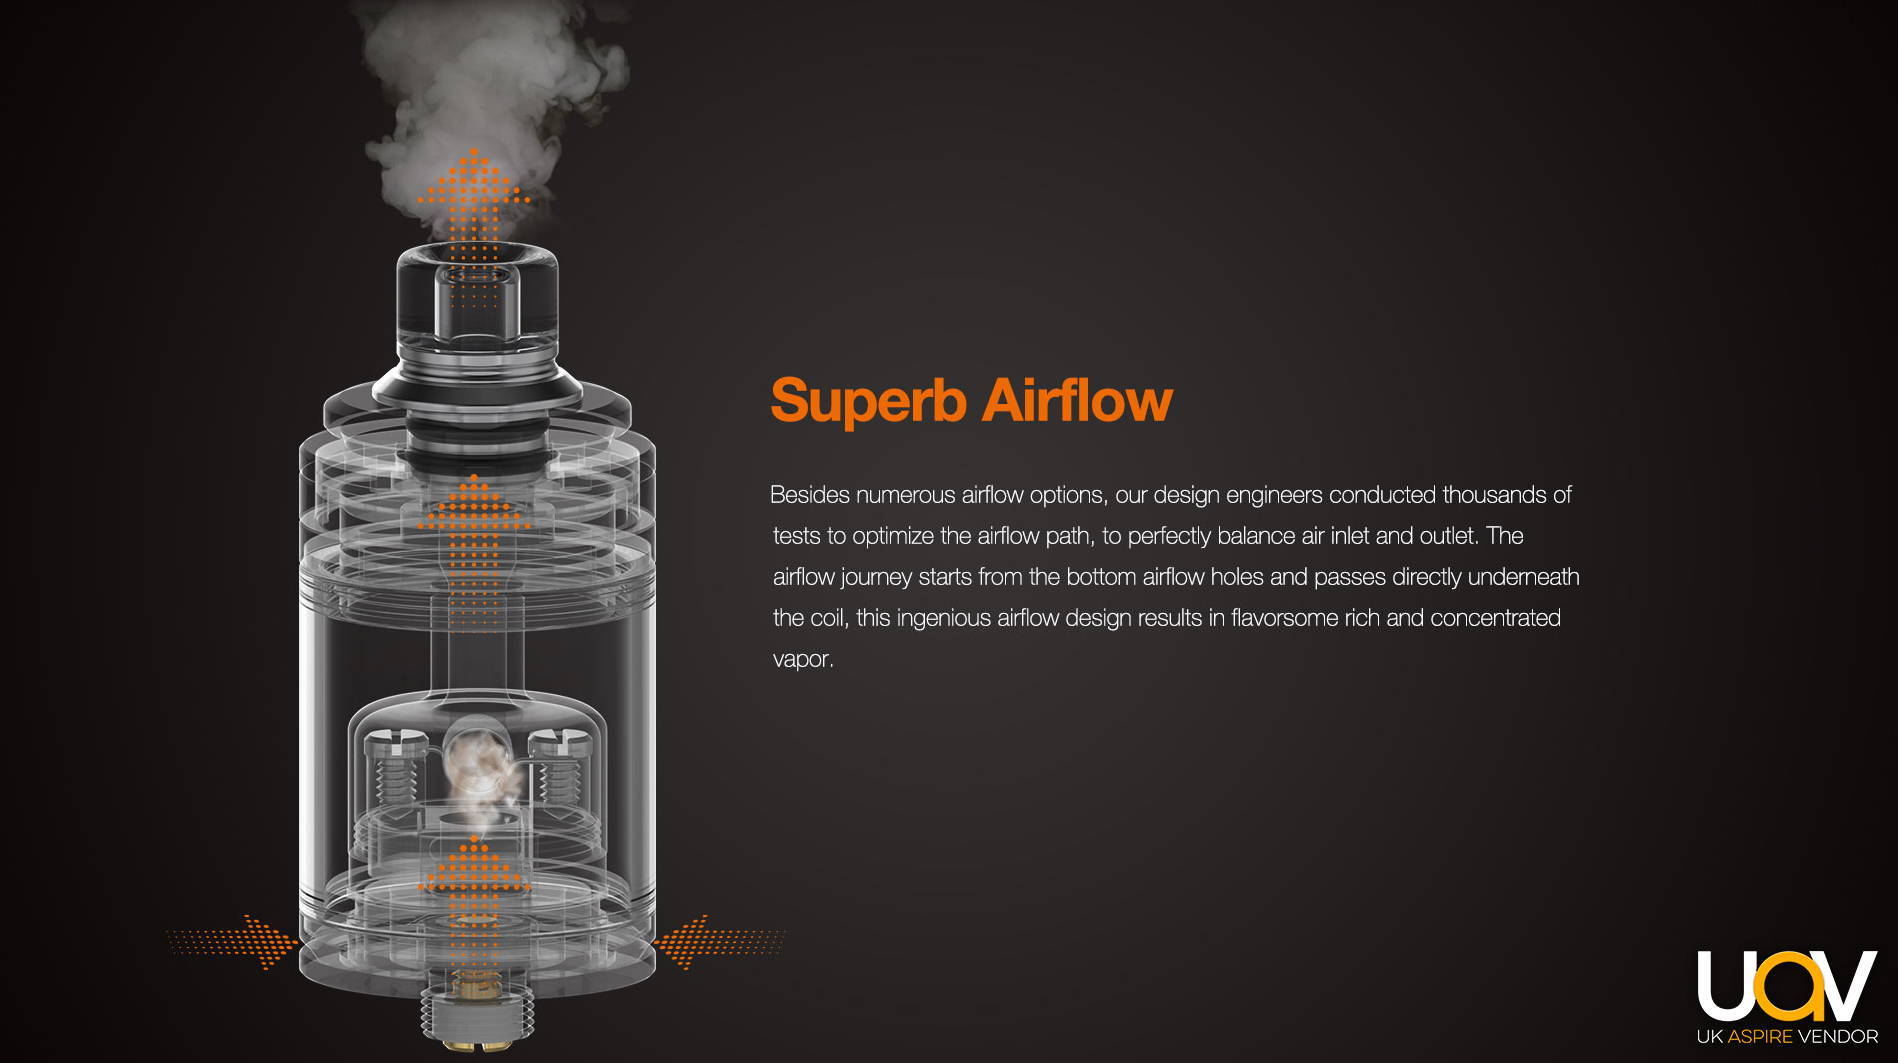 Besides numerous airflow options, our design engineers conducted thousands of tests to optimize the airflow path, to perfectly balance the air inlet and outlet. The airflow journey starts from the bottom airflow holes and passes directly underneath the coils, this ingenious airflow design results in flavorsome rich and concentrated vapor.